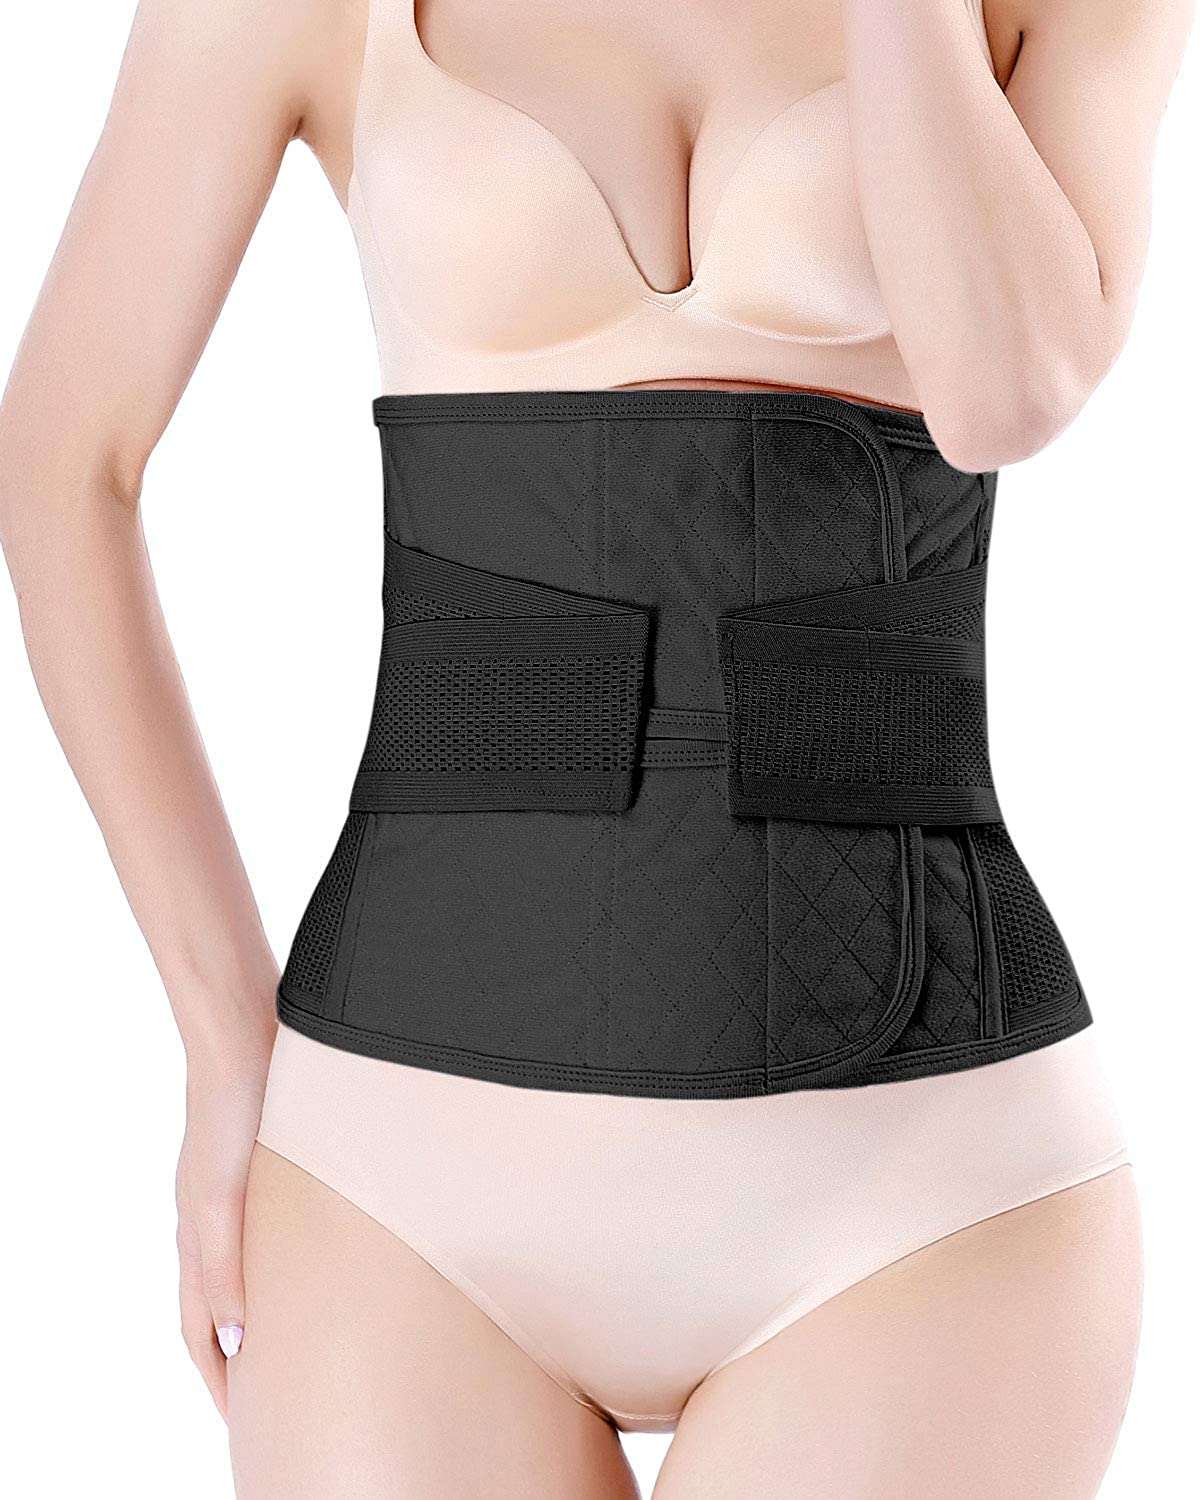 Postpartum Belly Wrap C Section Recovery Belt Girdle Belly Band Binder Back Support Brace Waist Shapewear for Women 